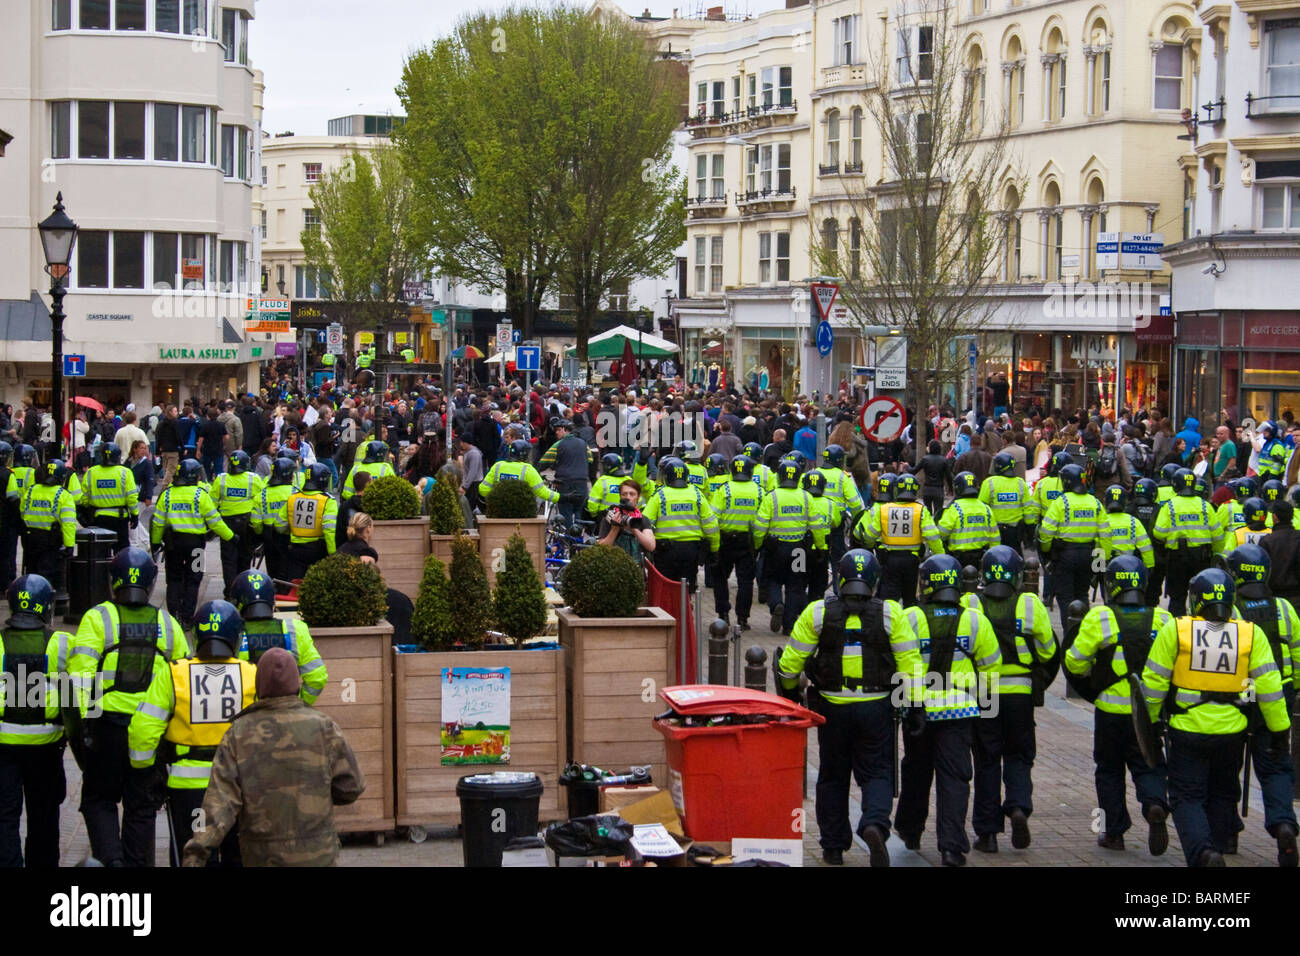 Lines of riot police contain crowds during may day protests in Brighton, Sussex, UK JPH0195 Stock Photo